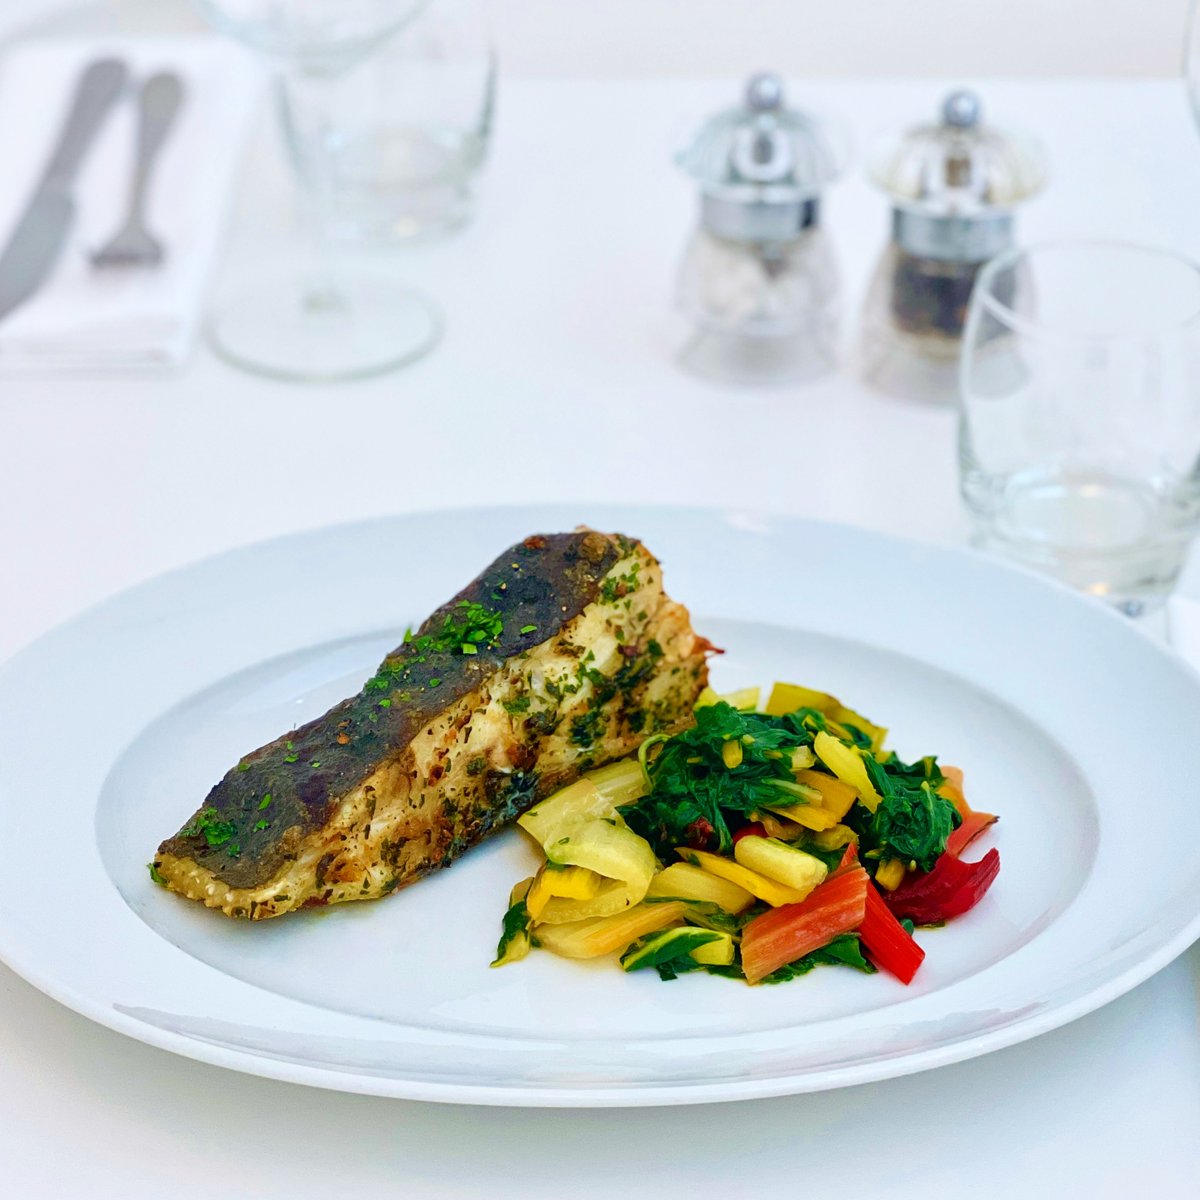 Starting the week off on a healthy note in Olivomare…oven roasted turbot with sautéed rainbow chard 🌈🐟🌈🐟
📍OLIVOMARE, 10 Lower Belgrave St
☎️020 7730 9022 for reservations or book via our website 
📱Download our Olivo Restaurants & Shops app for full menus & reservations.